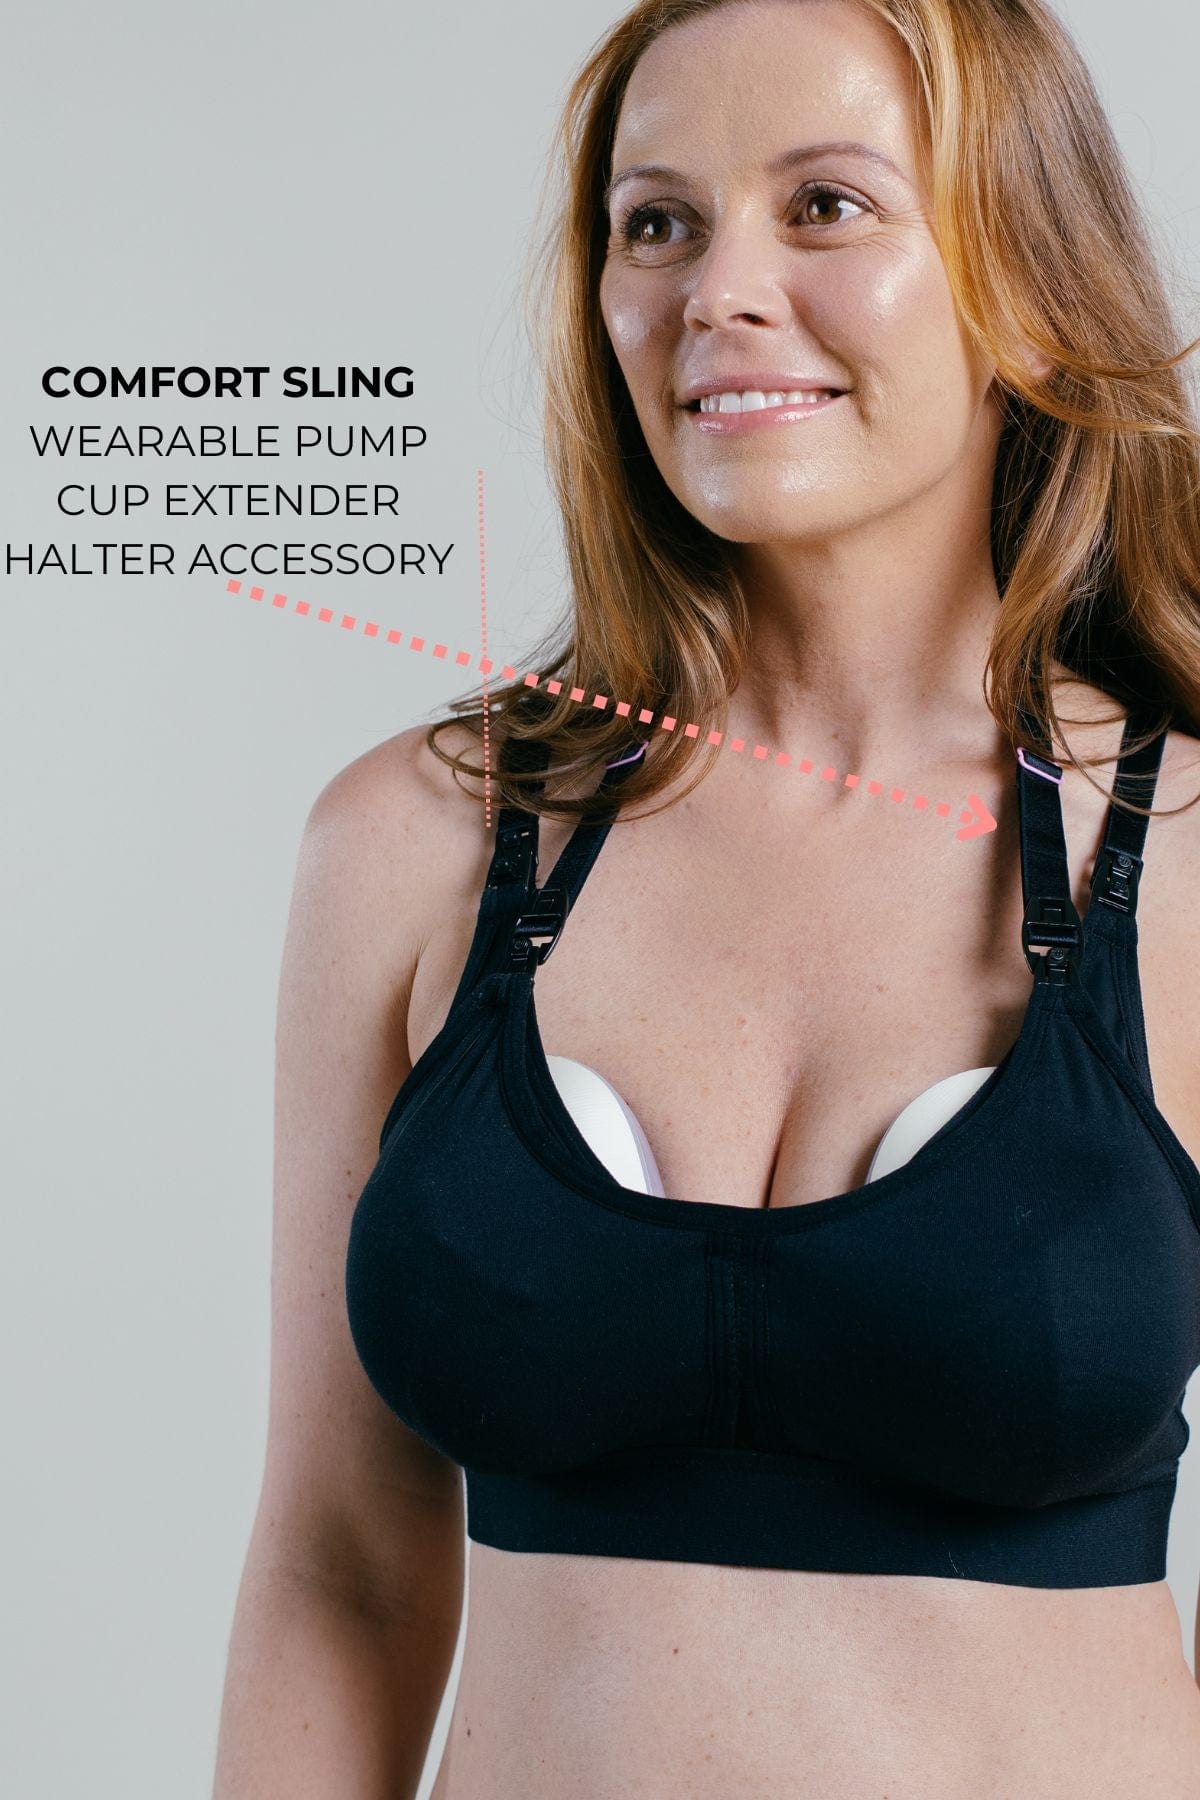 Healofy - Get rid of discomfort due to tight bras with Femzy Bra extenders.  You deserve the utmost comfort during your motherhood journey. Comment now  to know the price. ( Link Given